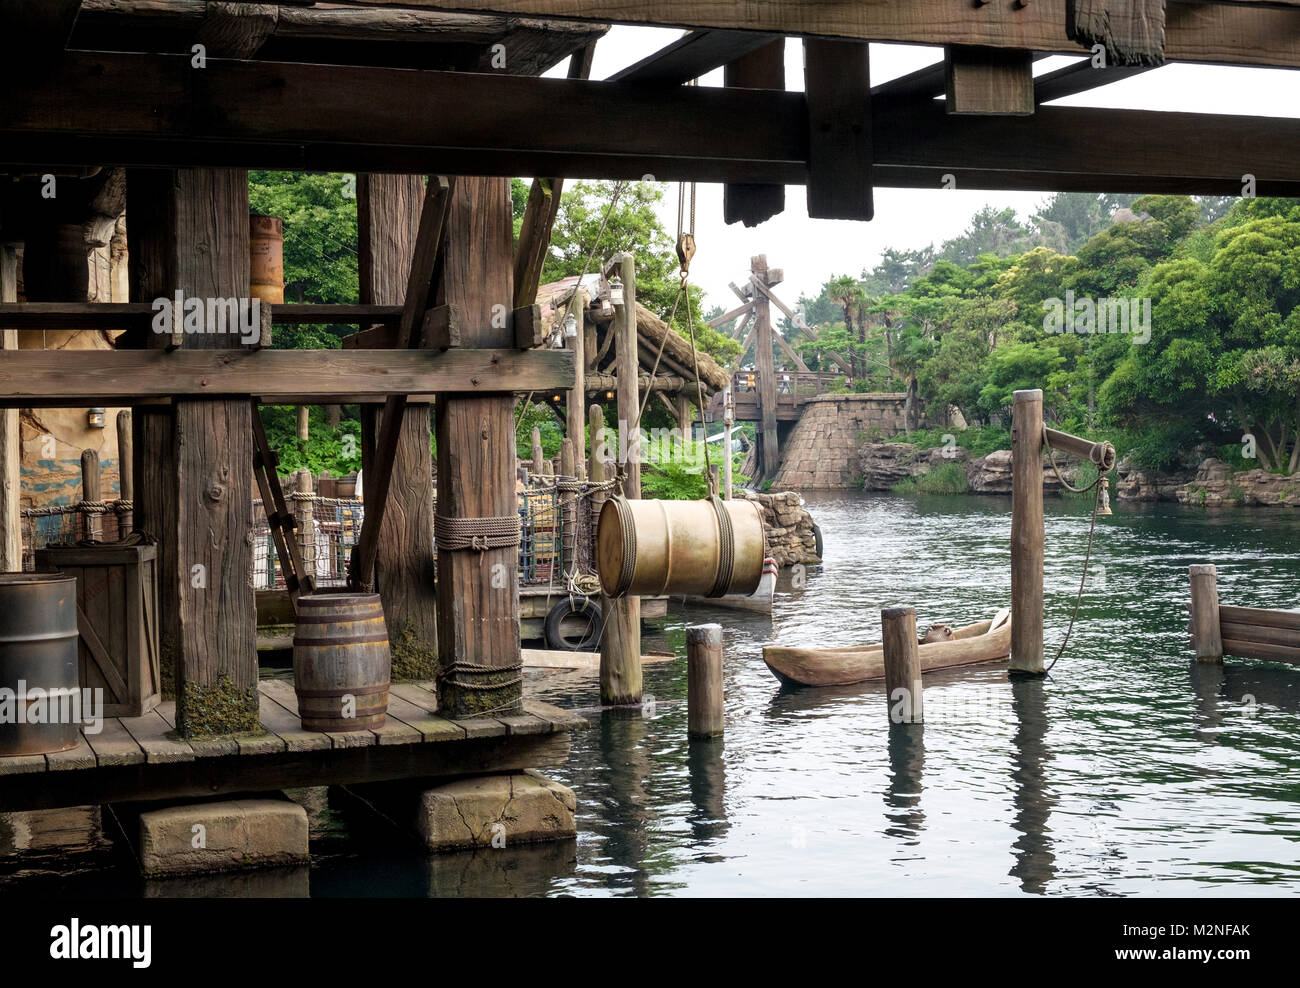 Old weathered wooden dock with retro wooden barrels and beams. Old ropes, metal container hanging over the water by a rope with a hook and pulley. Stock Photo